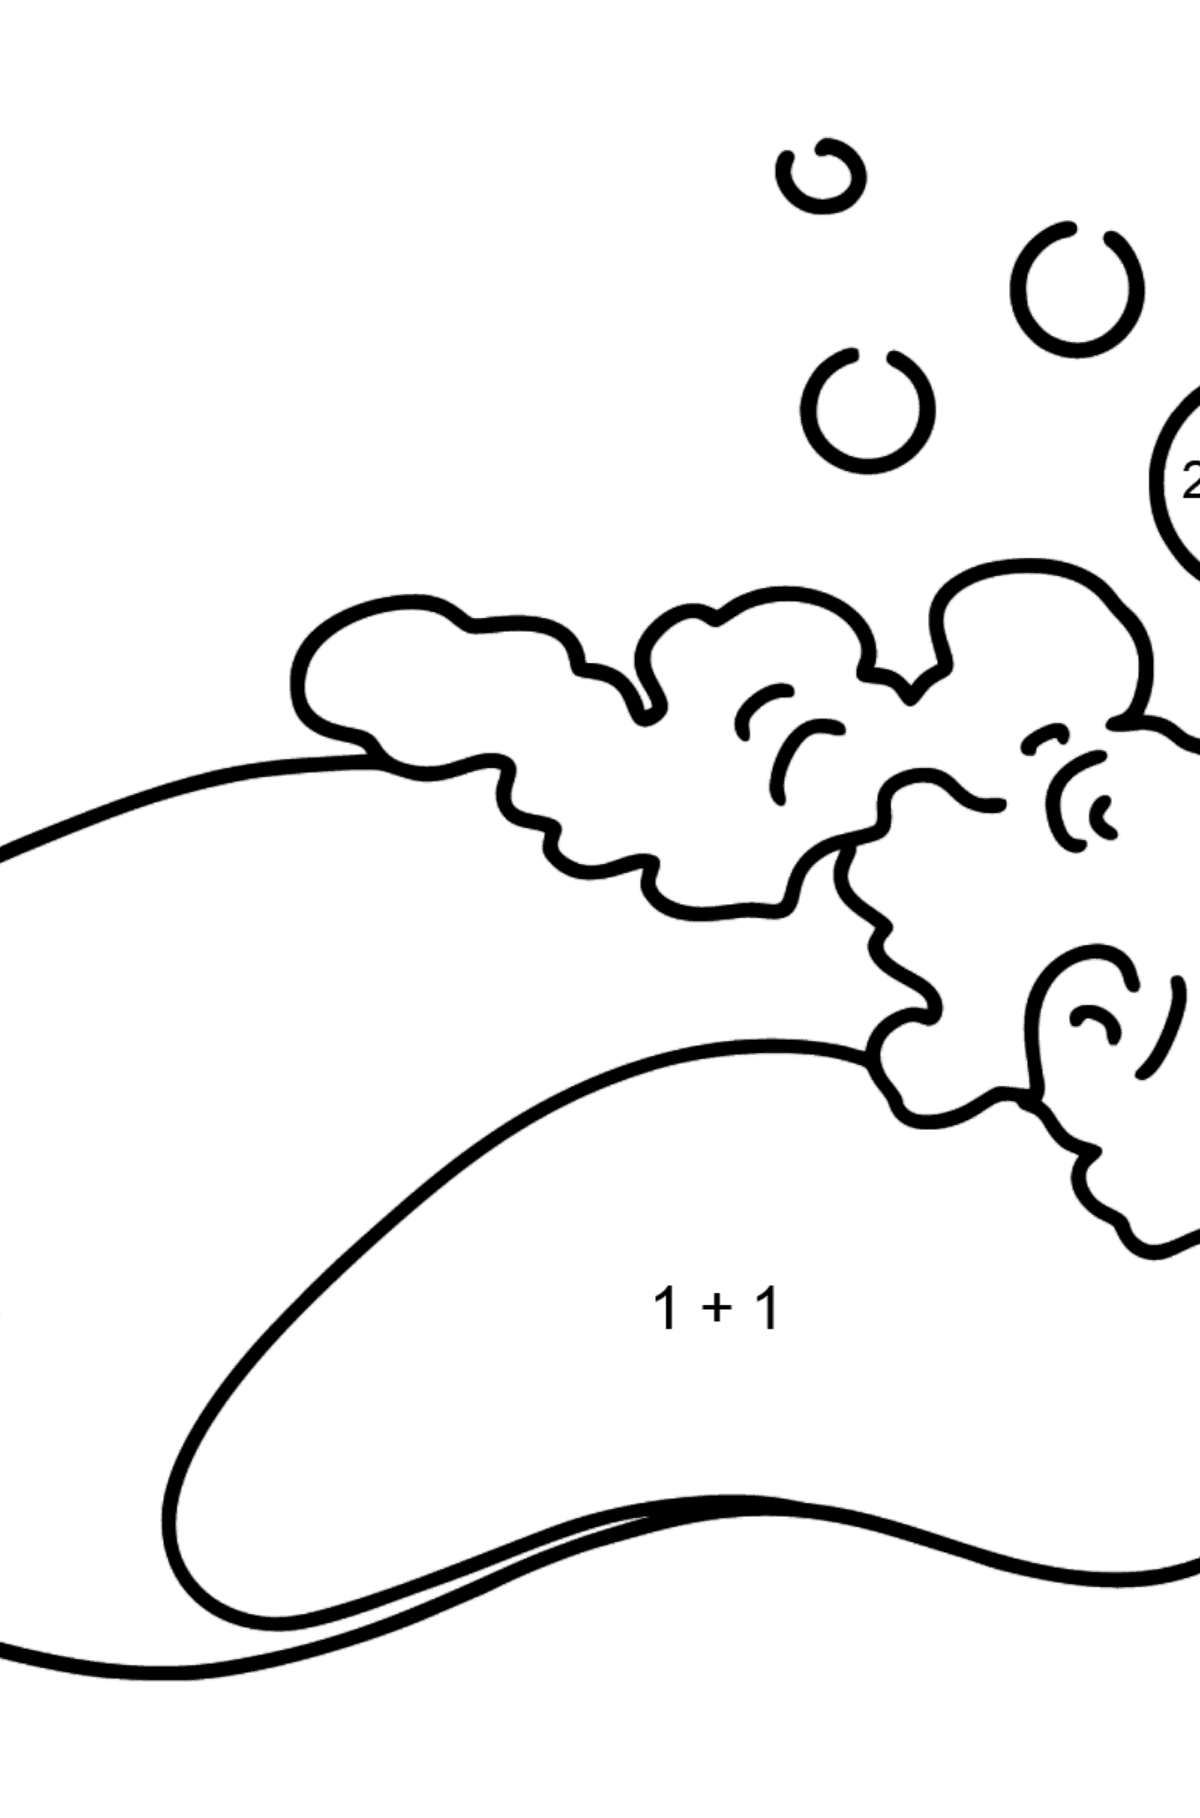 Soap coloring page - Math Coloring - Addition for Kids